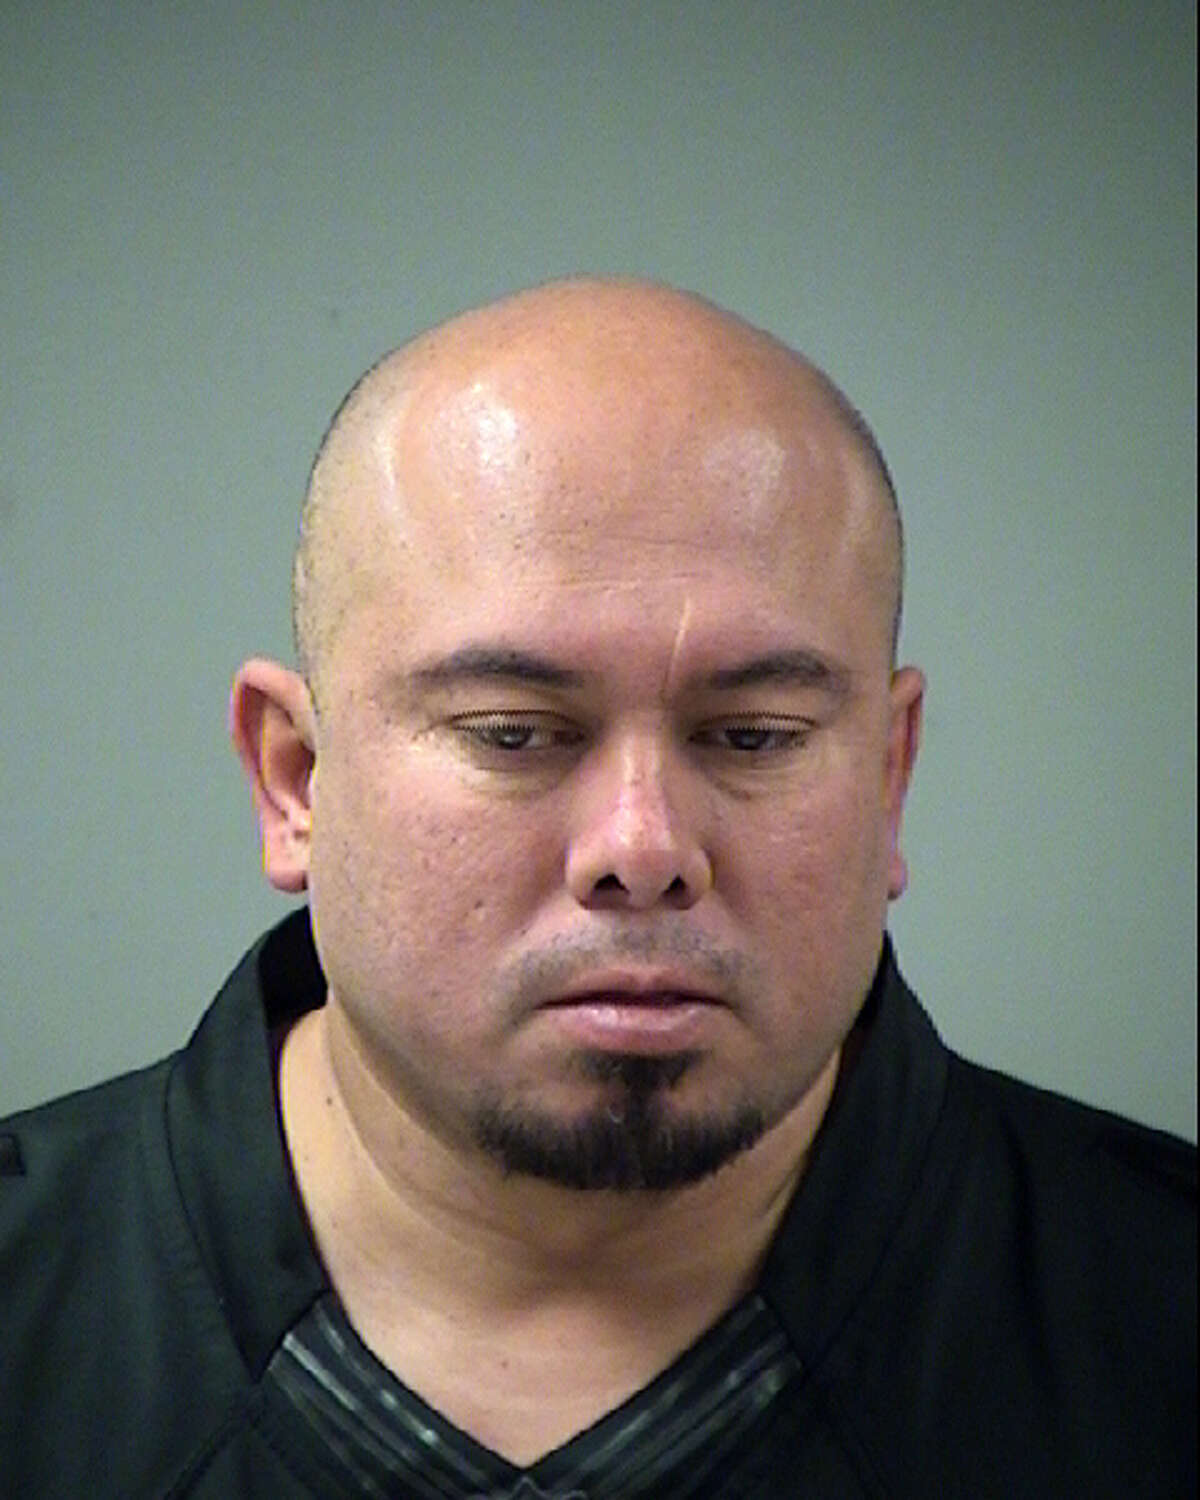 San Antonio man arrested for allegedly sharing naked photo 